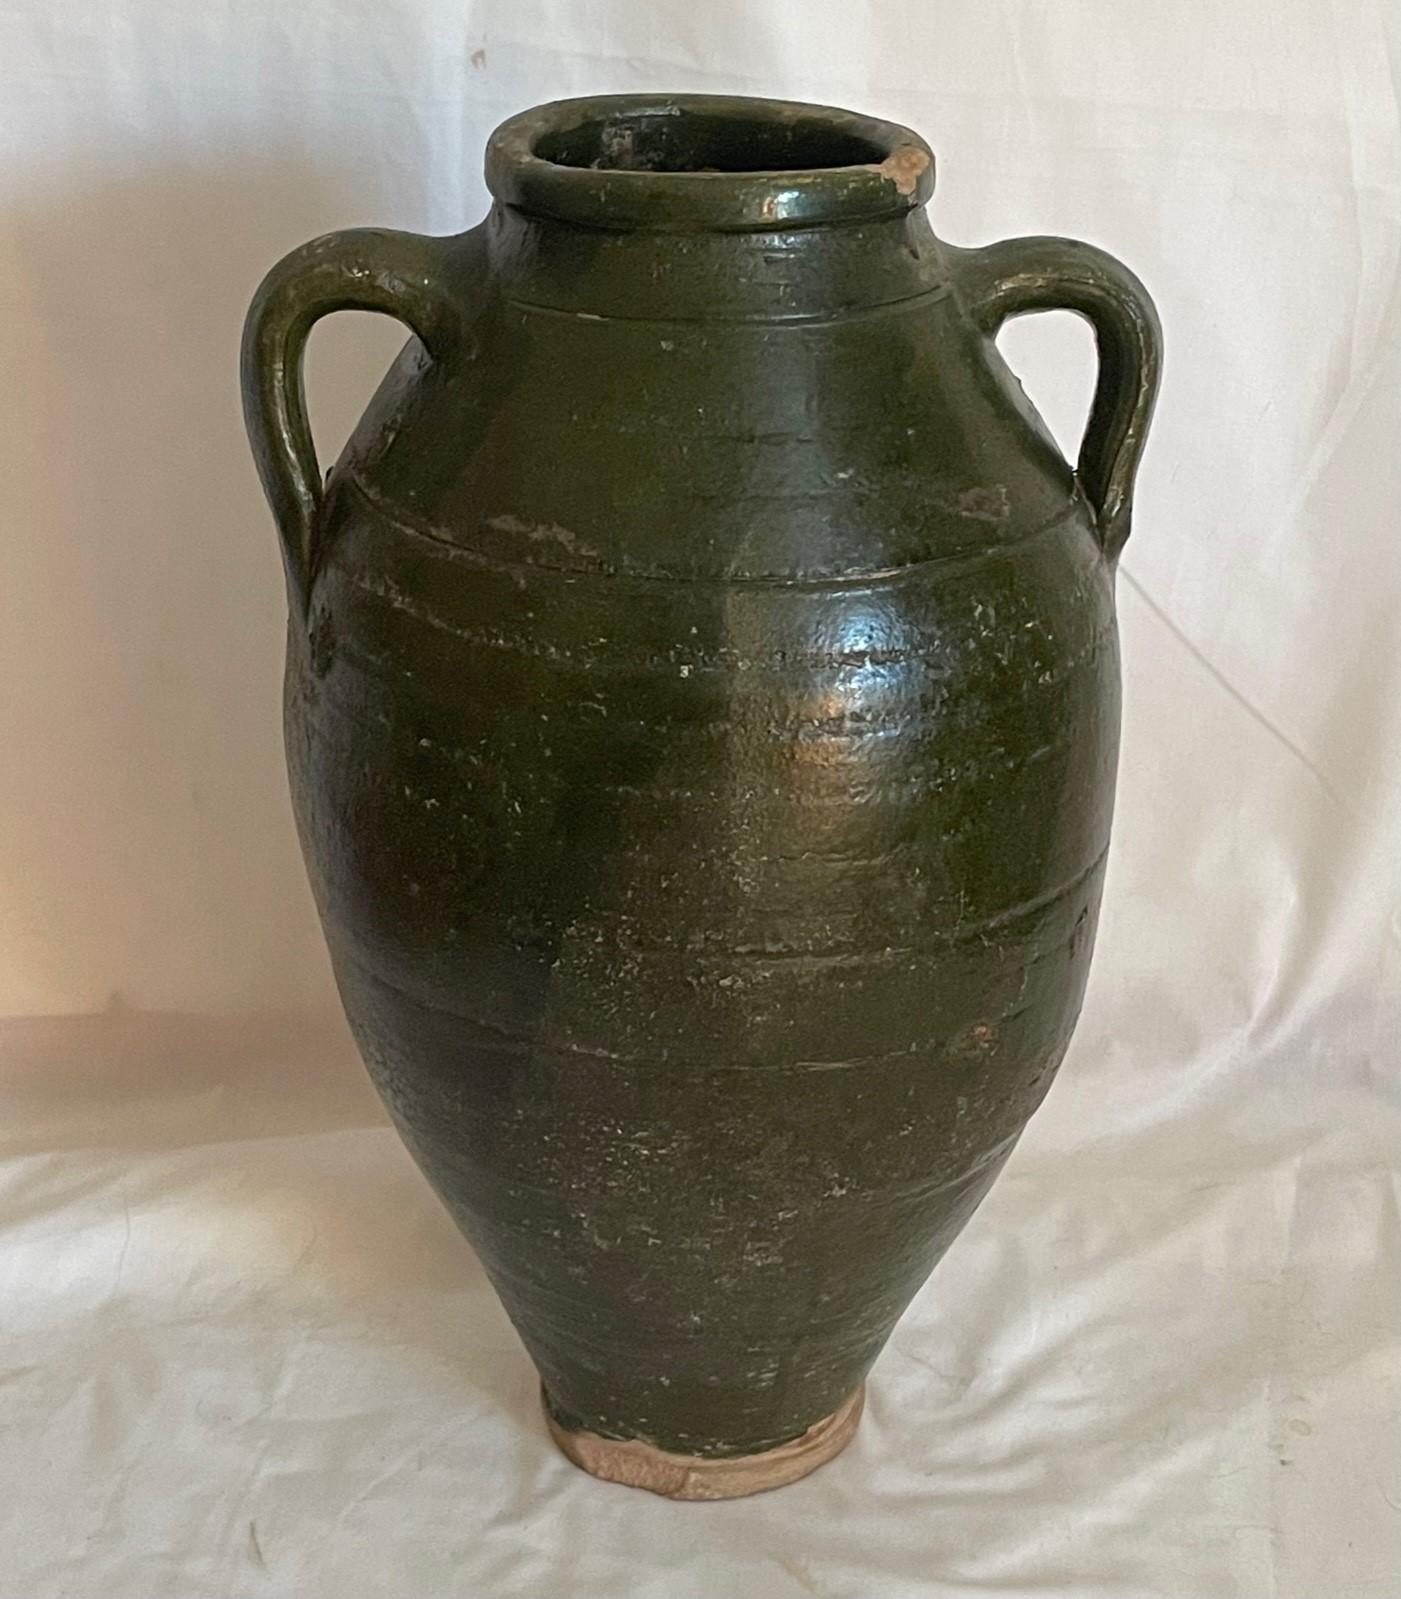 19th Century French terracotta amphora olive jar

French provincial double handle amphora vessel with dark green glaze from the 19th century. The terracotta jug features a green glazed body with a nicely distressed patina. Probably created for the